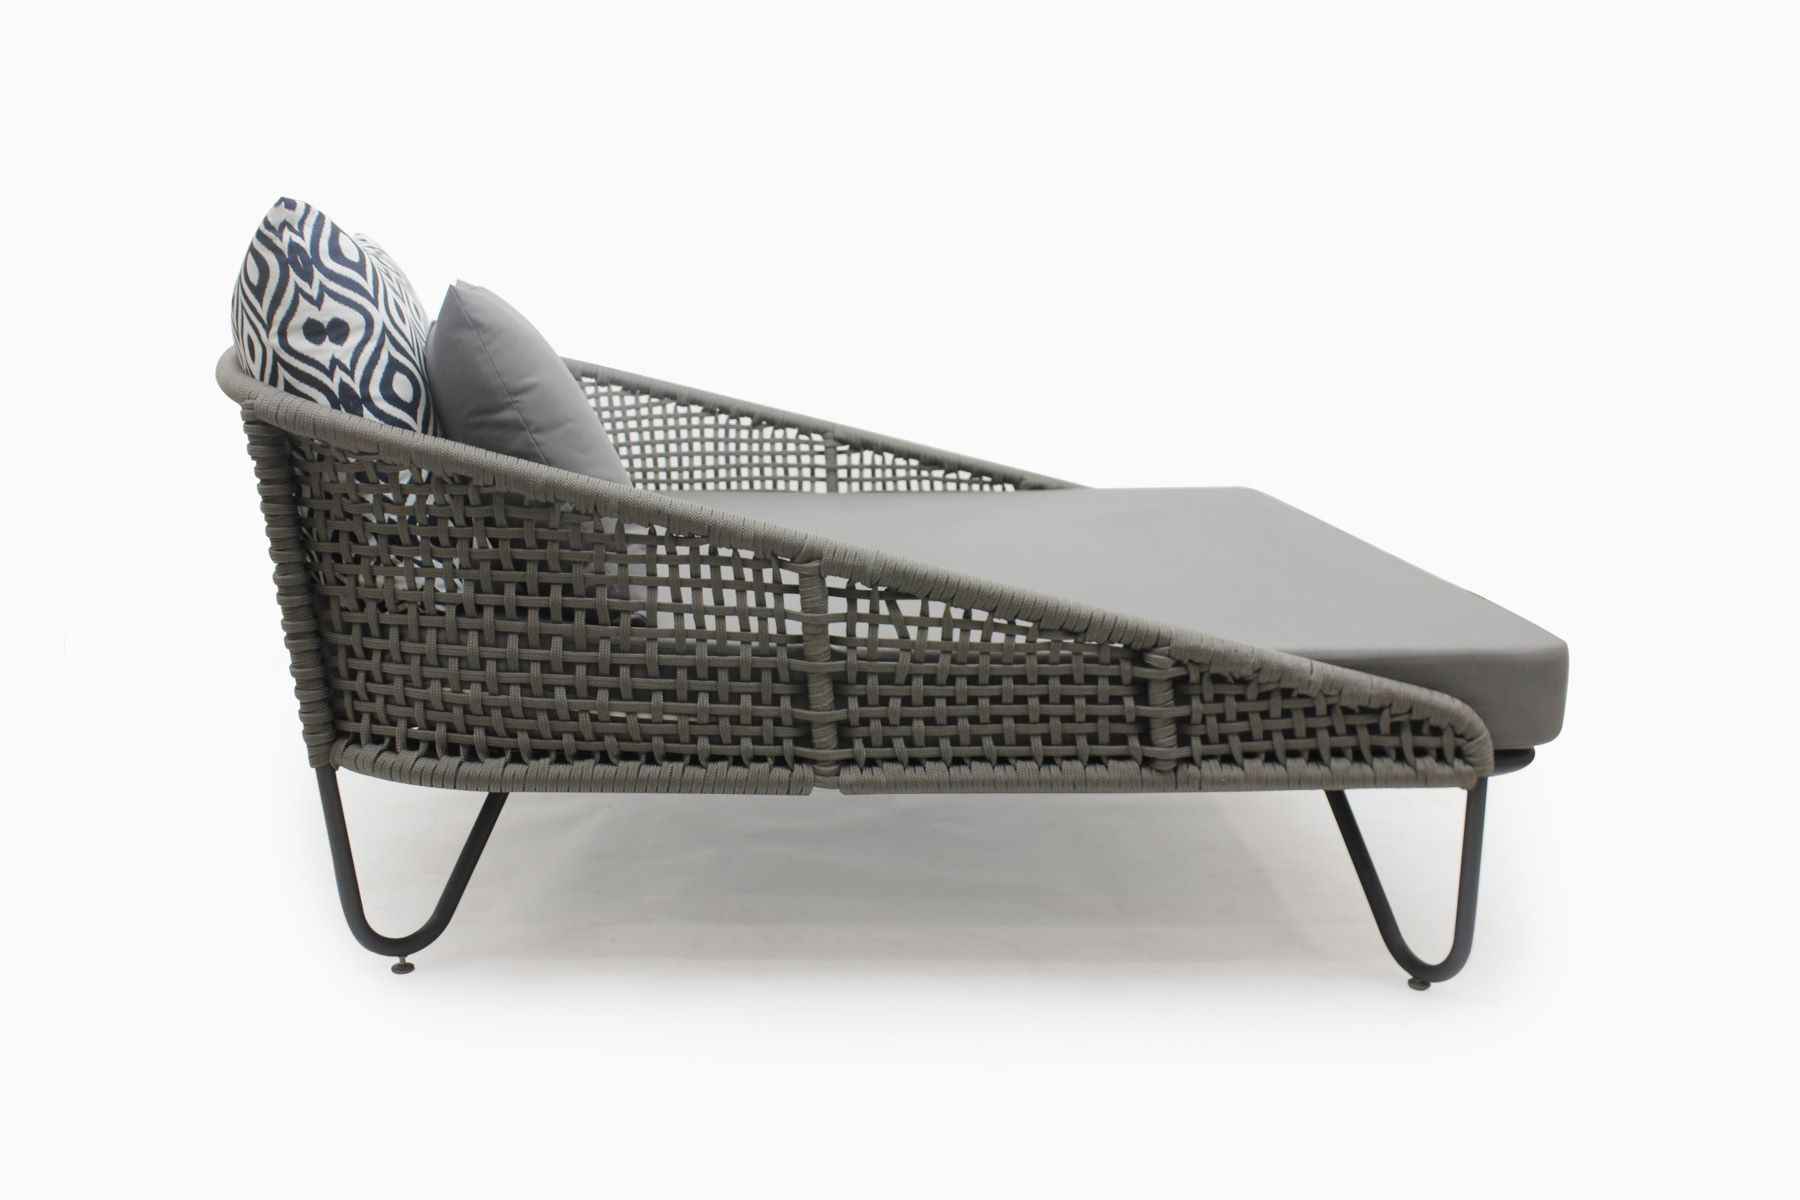 Calen Patio Daybed